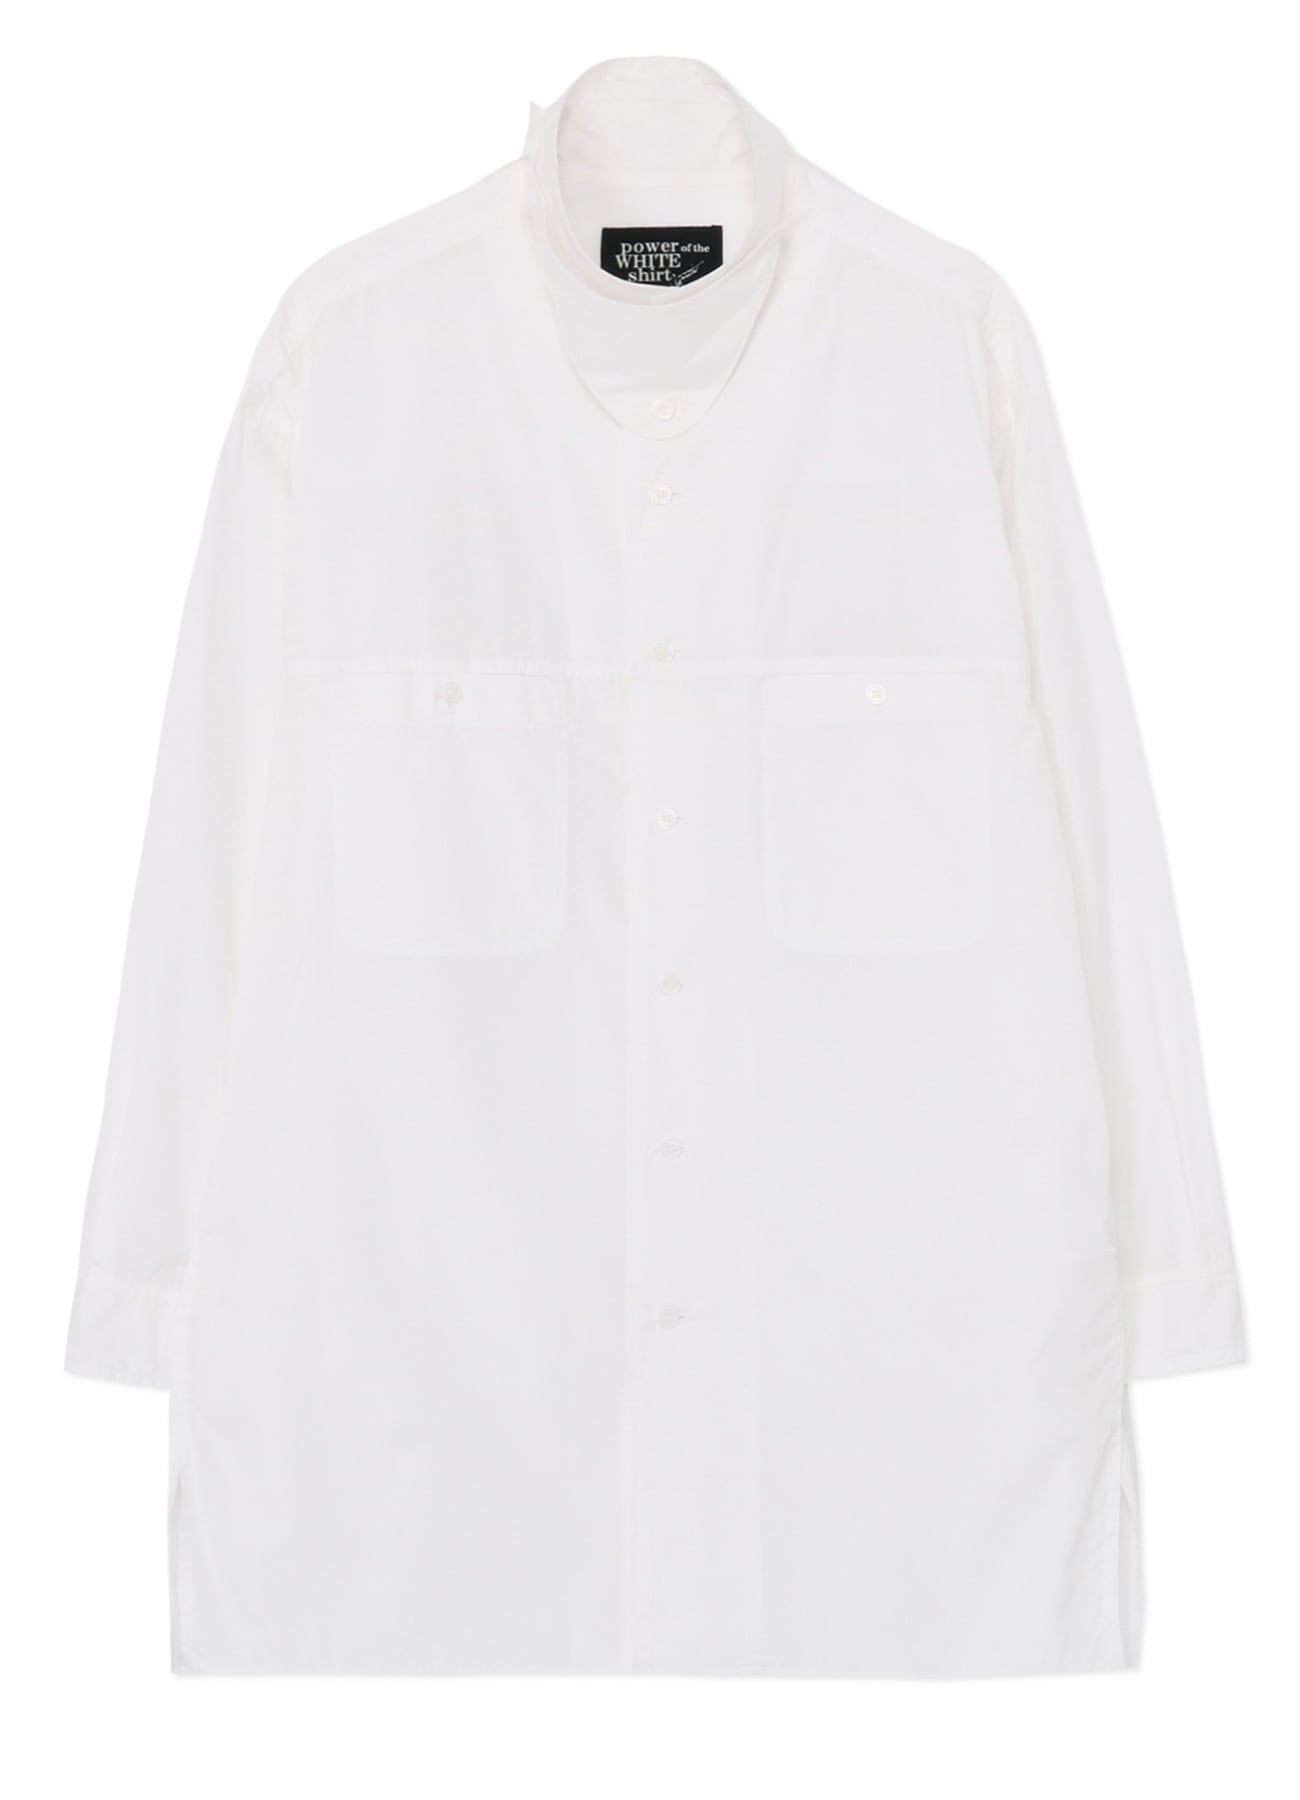 SHIRT WITH CHIN FLAP DETAIL(S White): power of the WHITE shirt 